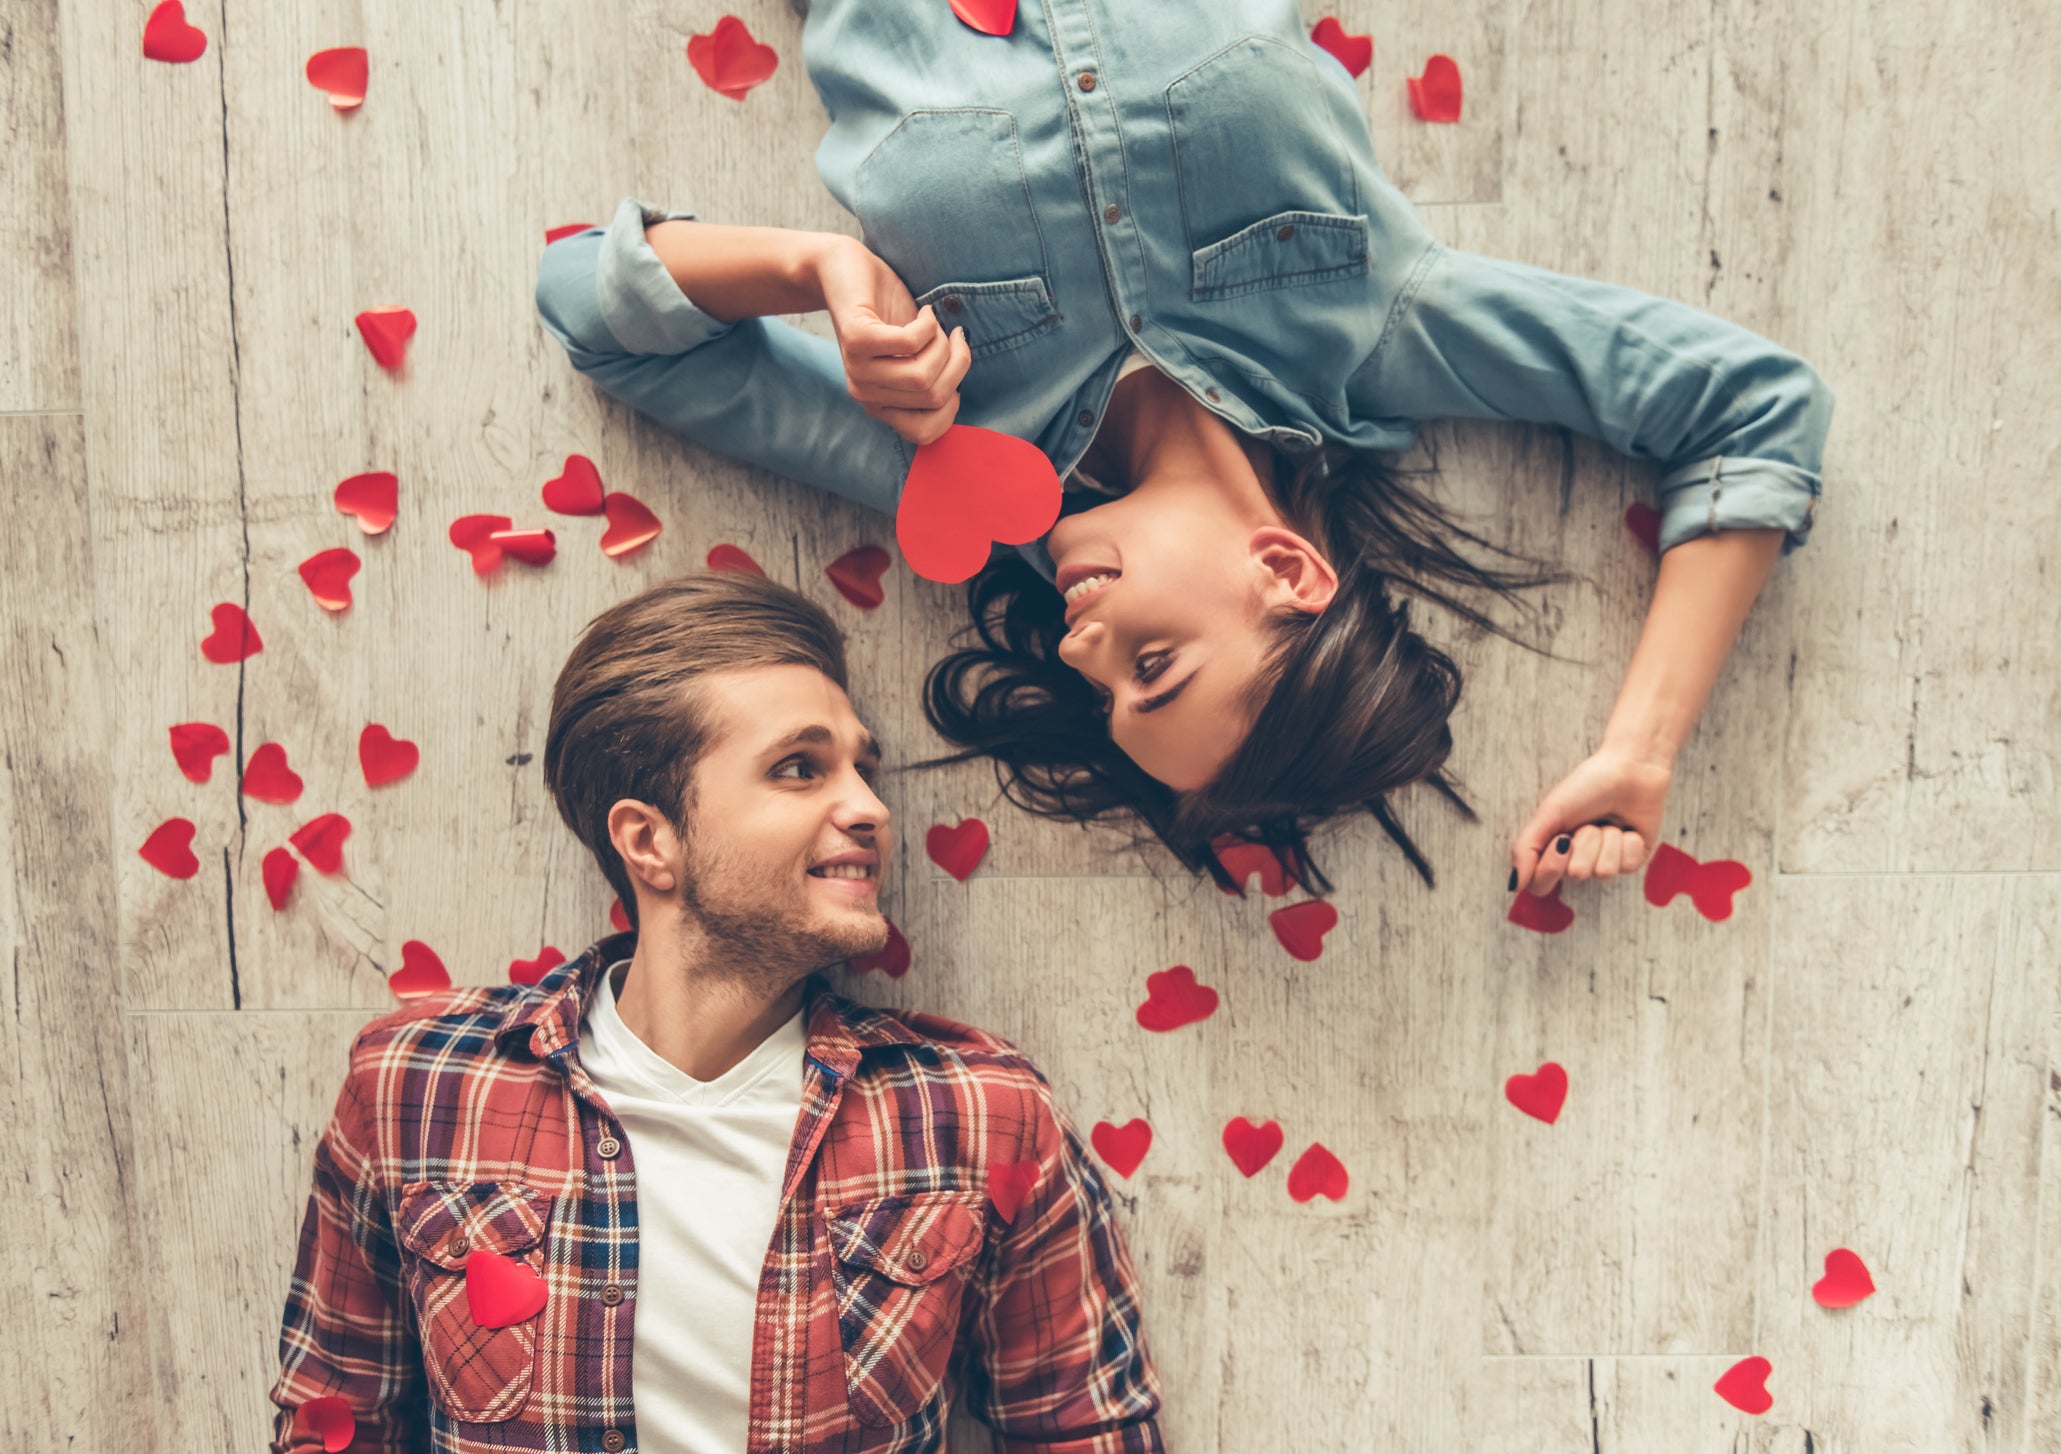 Speaking in tongues: the way you express love could be different to your partner